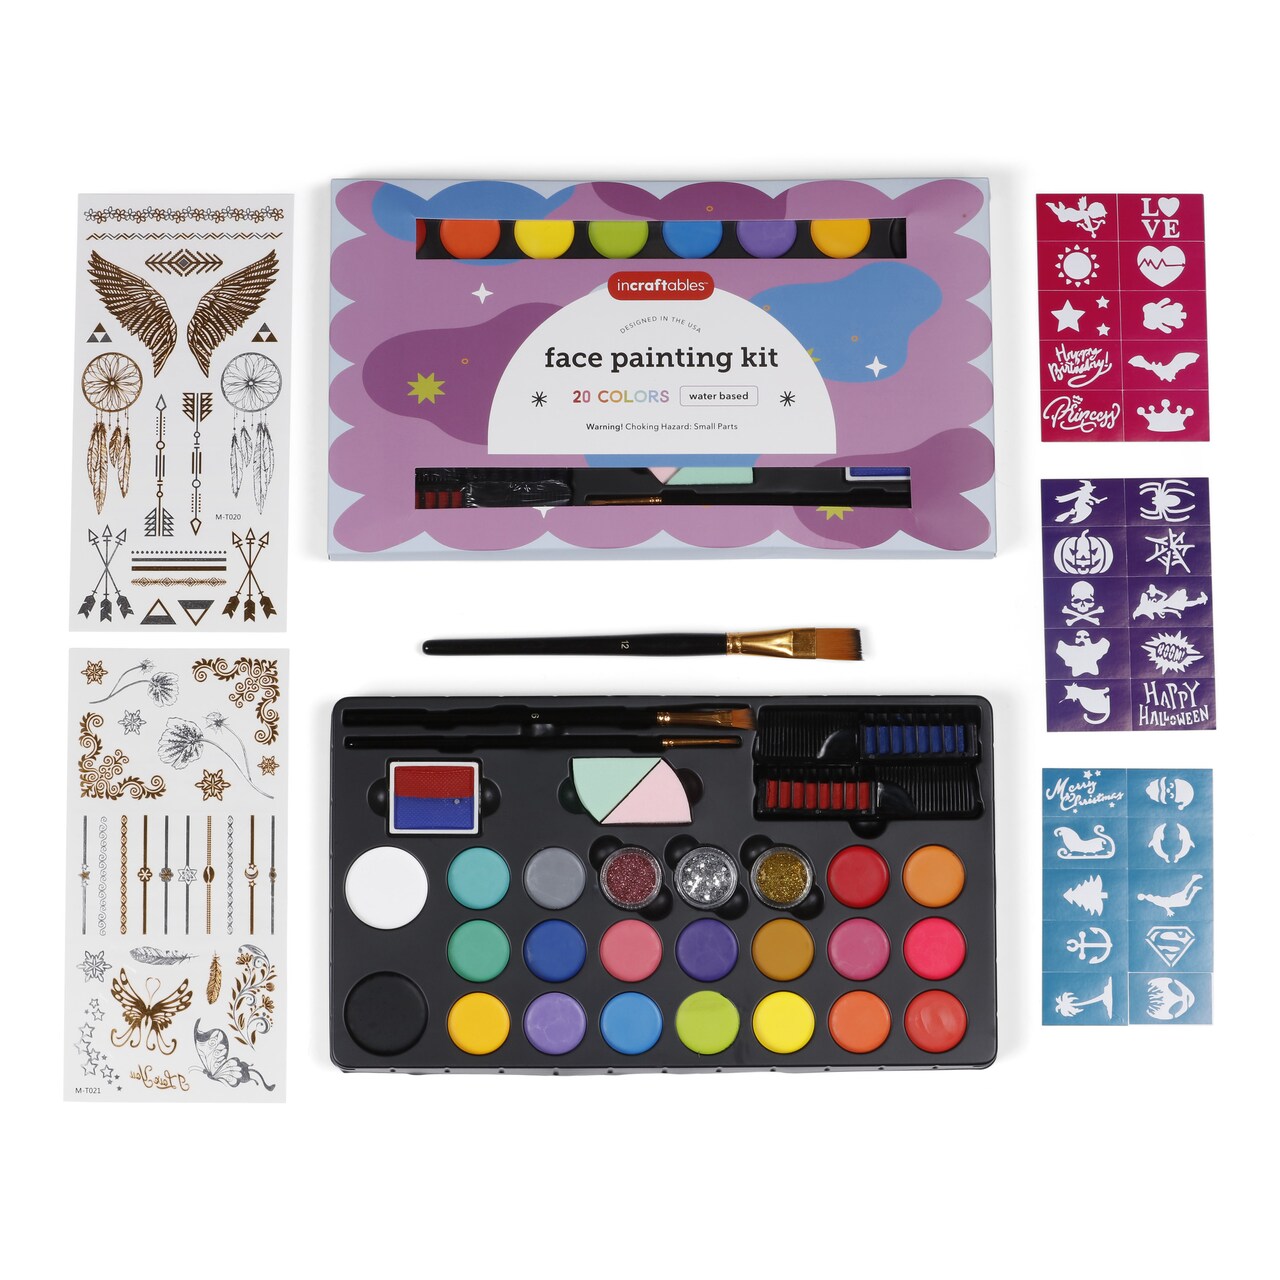 Incraftables Face Painting Kit for Kids & Adults. Face Painting Kit for Kids  Party w/ Colors, Stencils, Brushes, Glitters & More. Non-Toxic Water Based Face  Paint Kit. Easy to Use DIY Facepaint